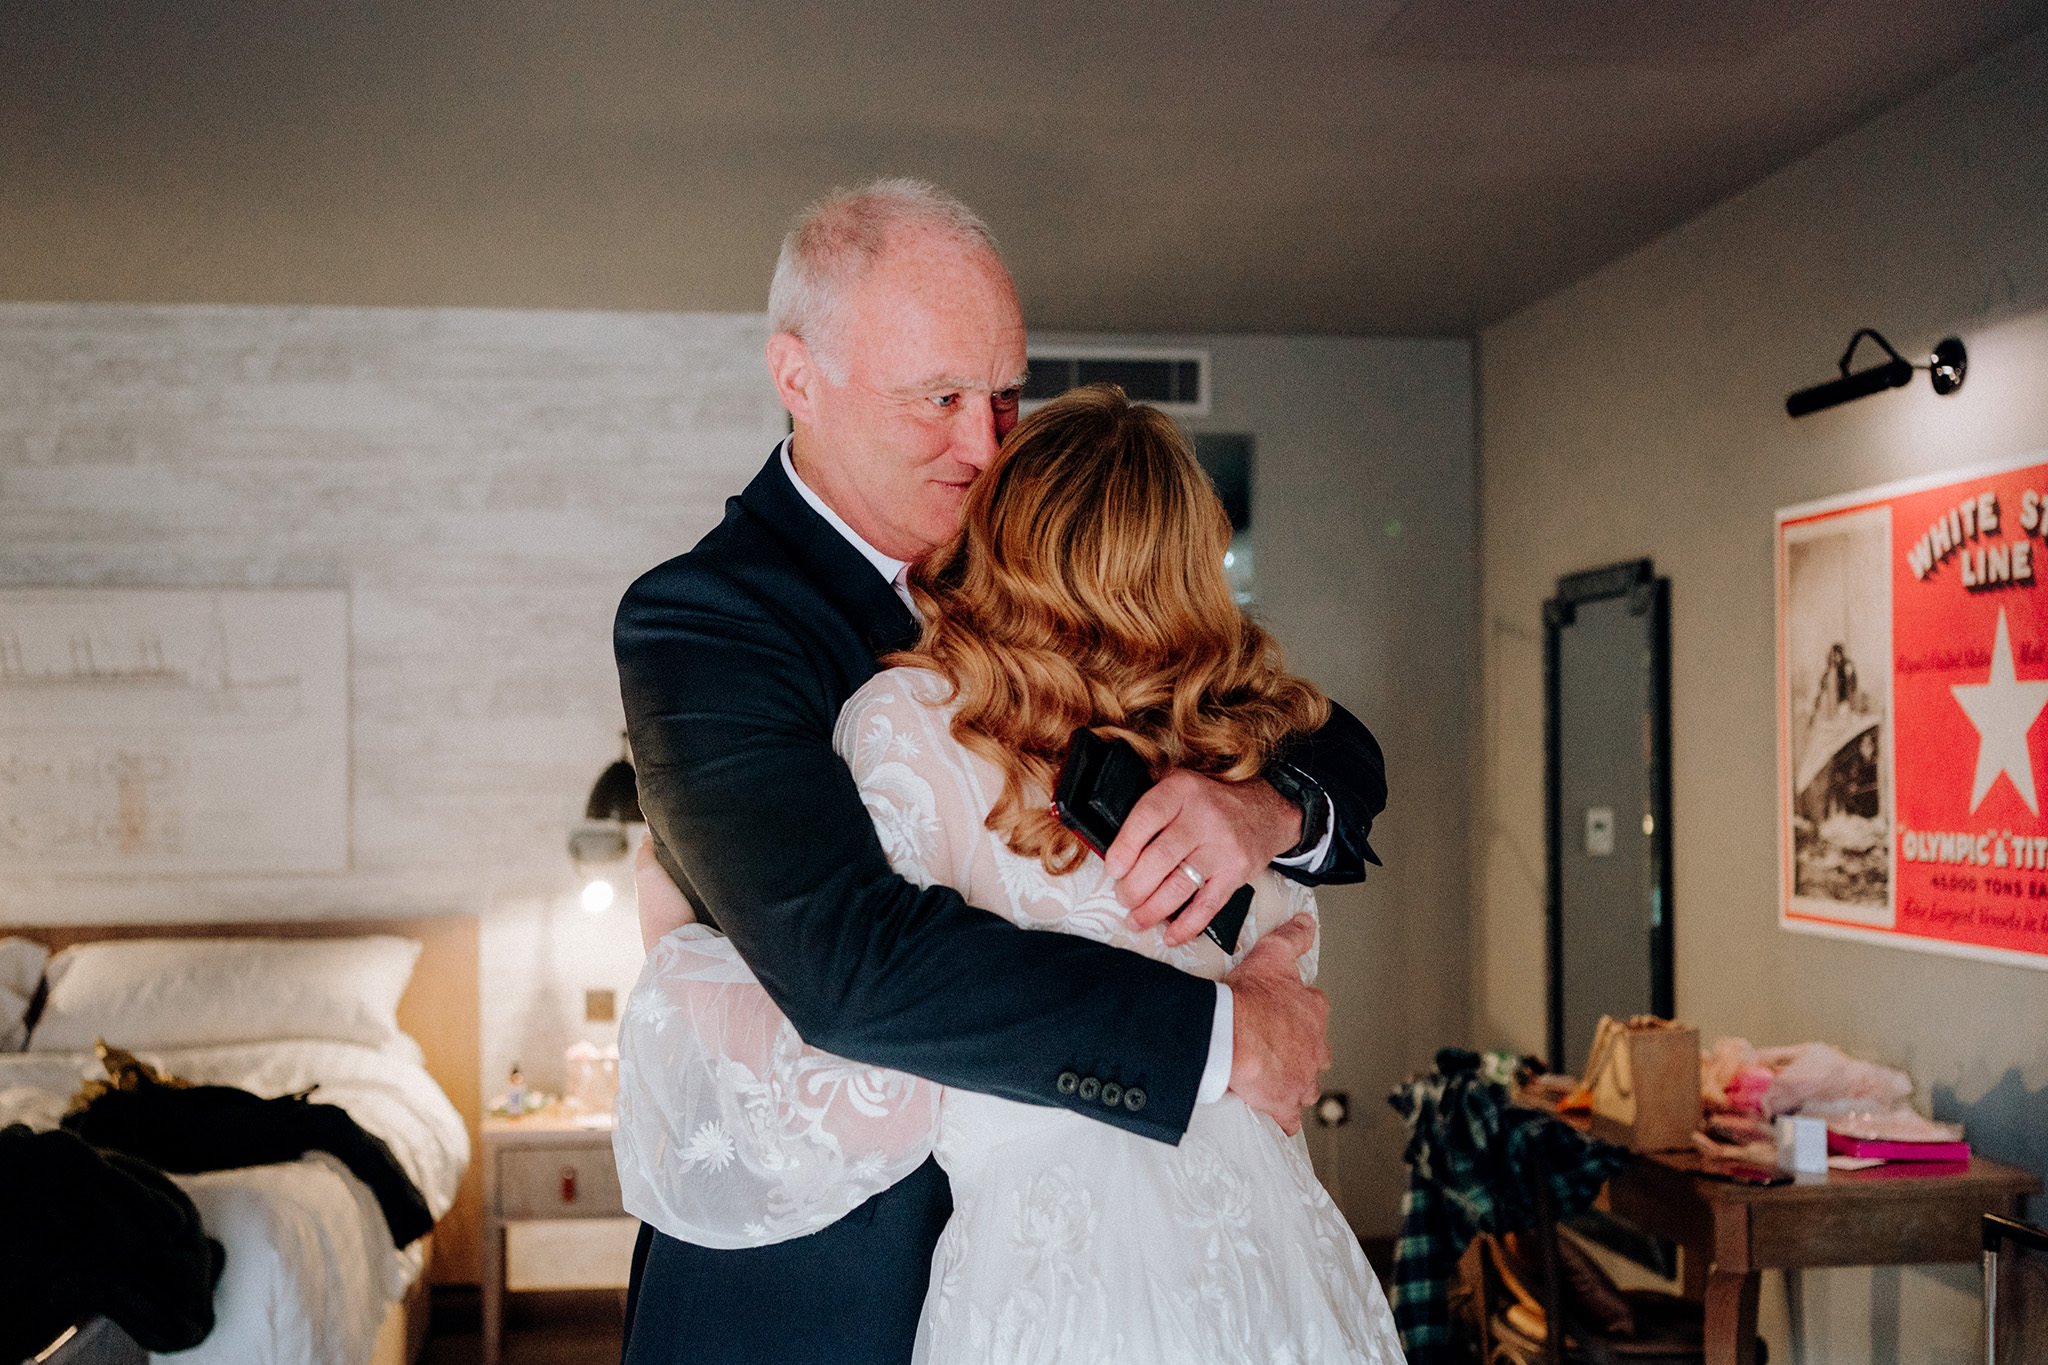 Father and daughter share a hug on the morning of her wedding